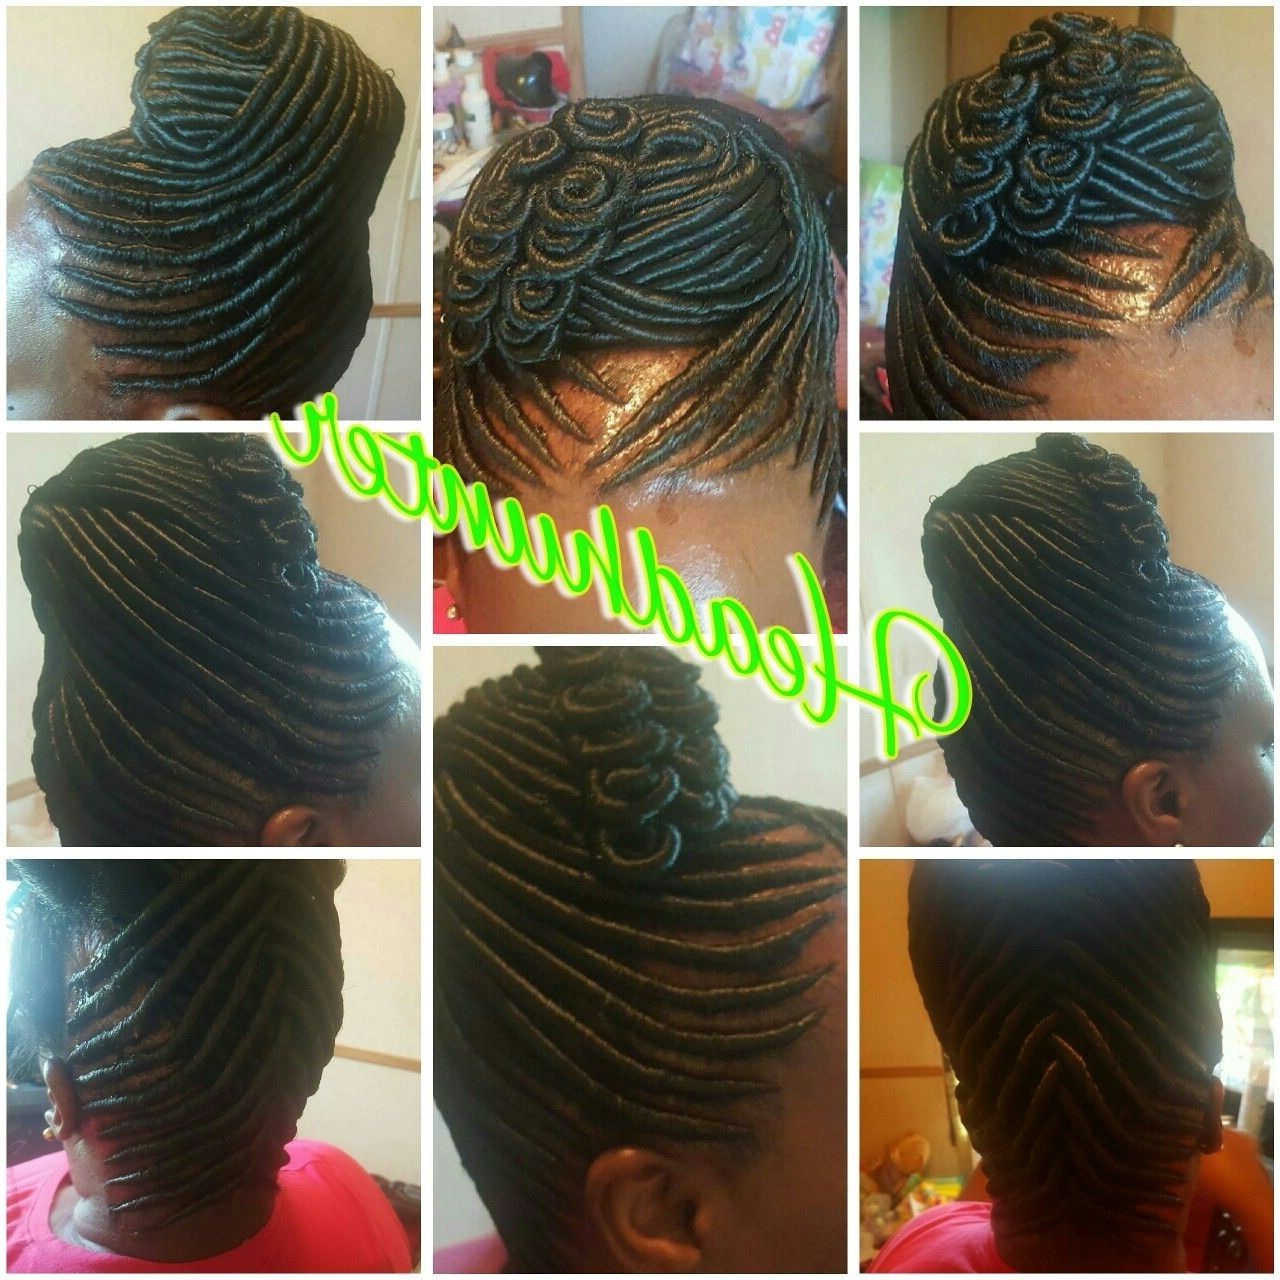 These 3 Cute Flat Twist Hairstyles Take Winning Prize – For Being With Stuffed Twist Updo Hairstyles (View 3 of 15)